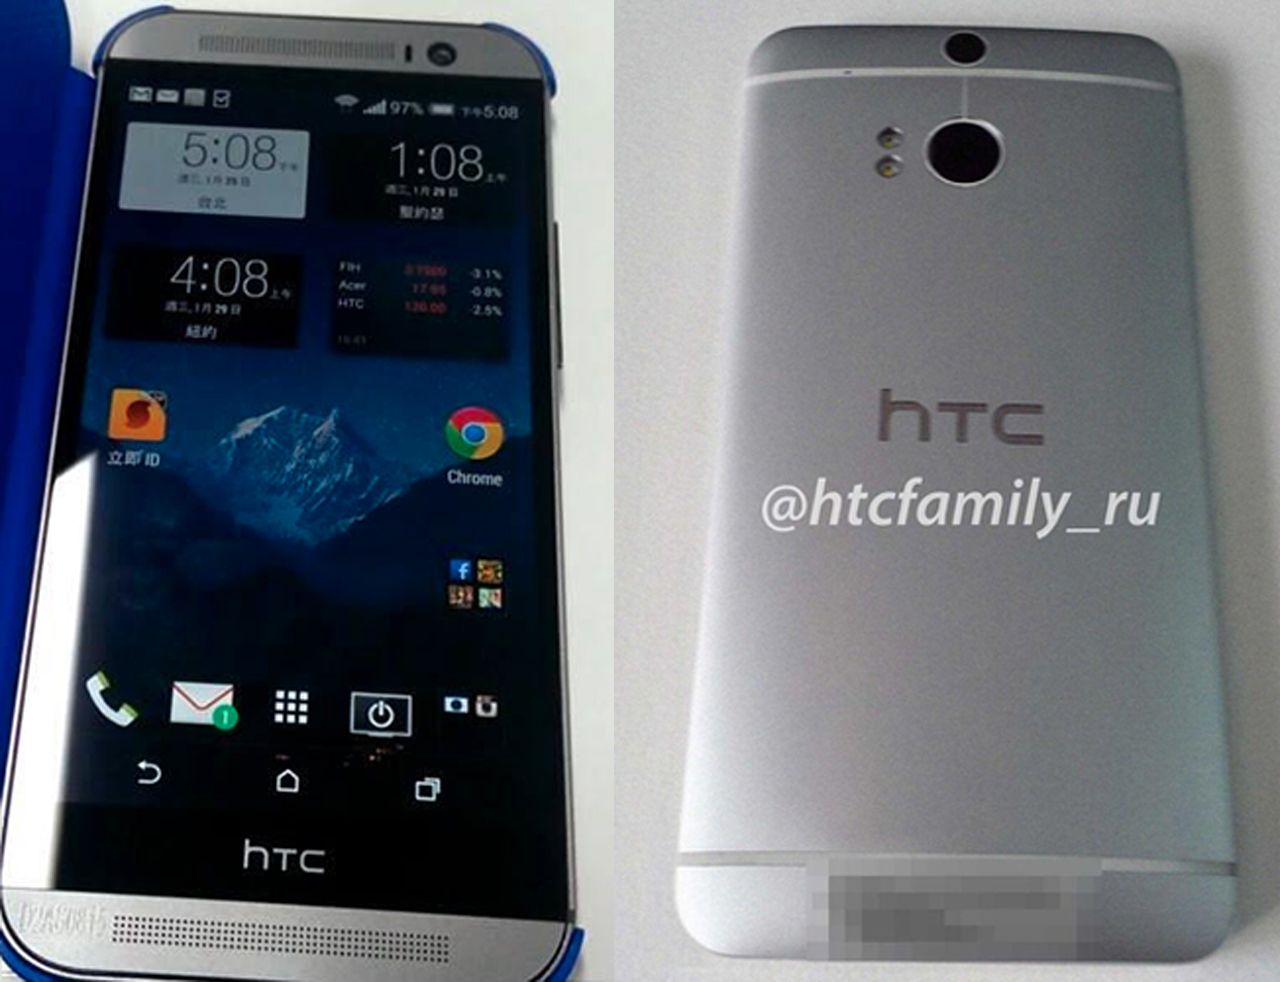 htc one m8 release date rumours and everything you need to know updated image 2